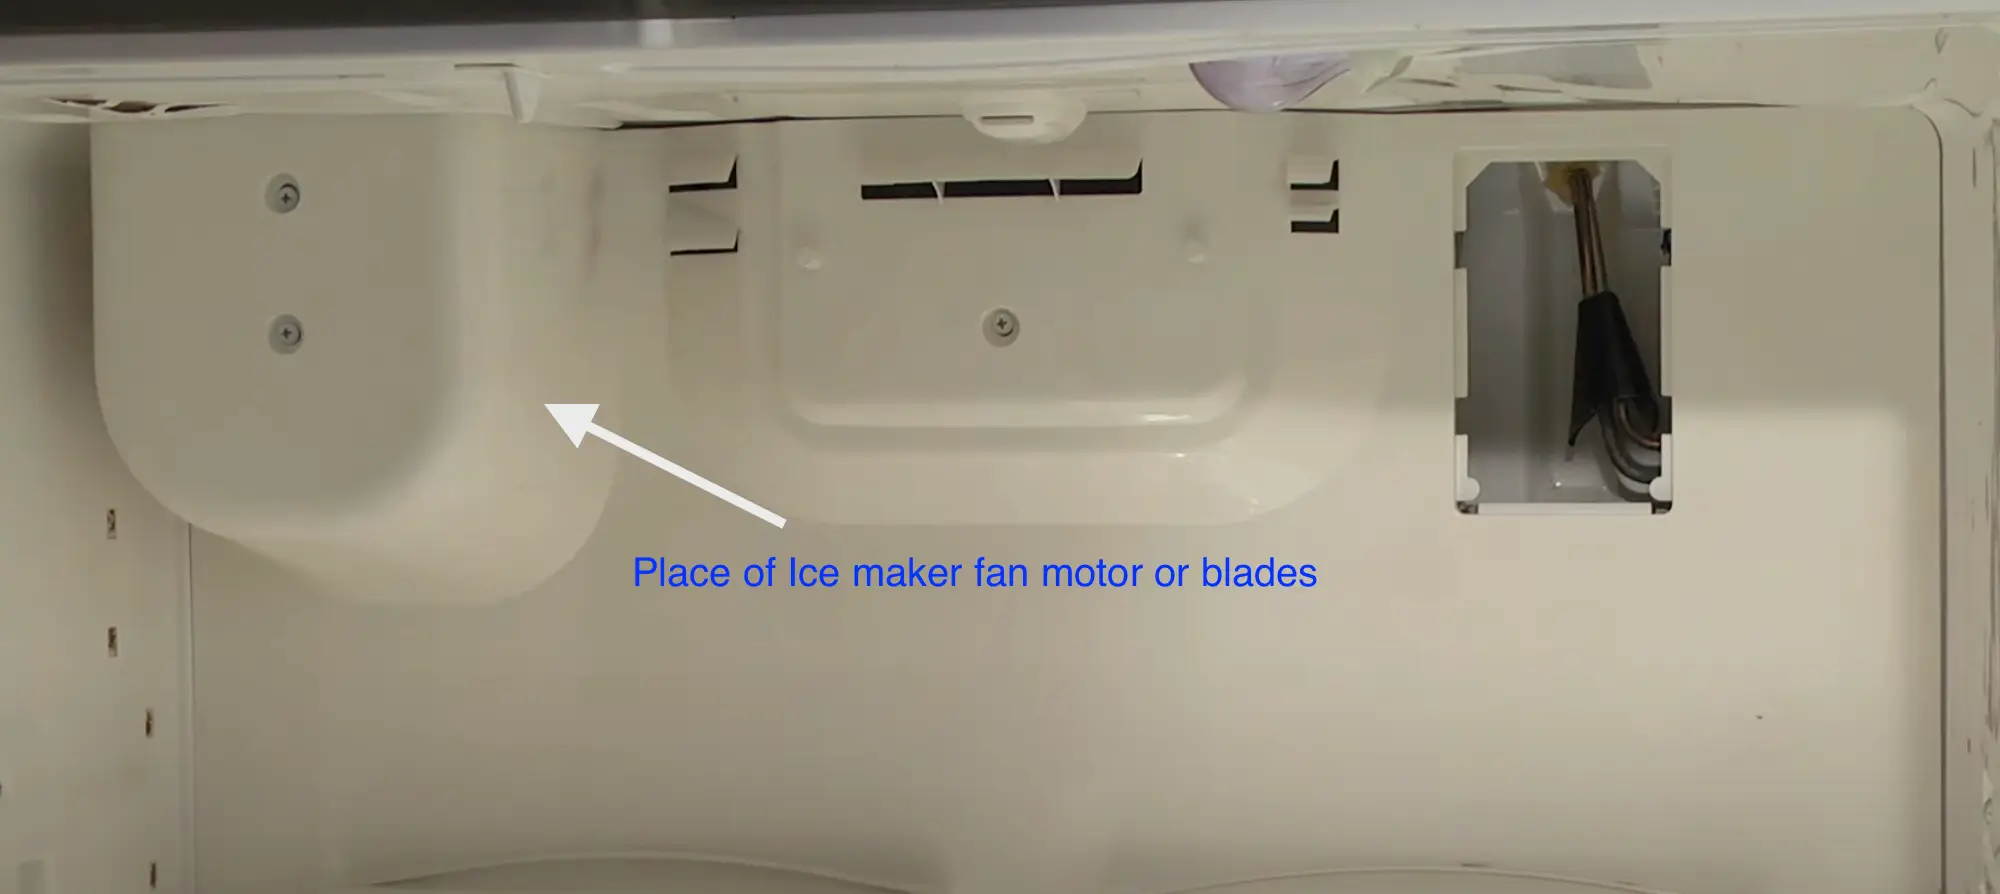 Image of replacing defective ice maker fan motor or blades 